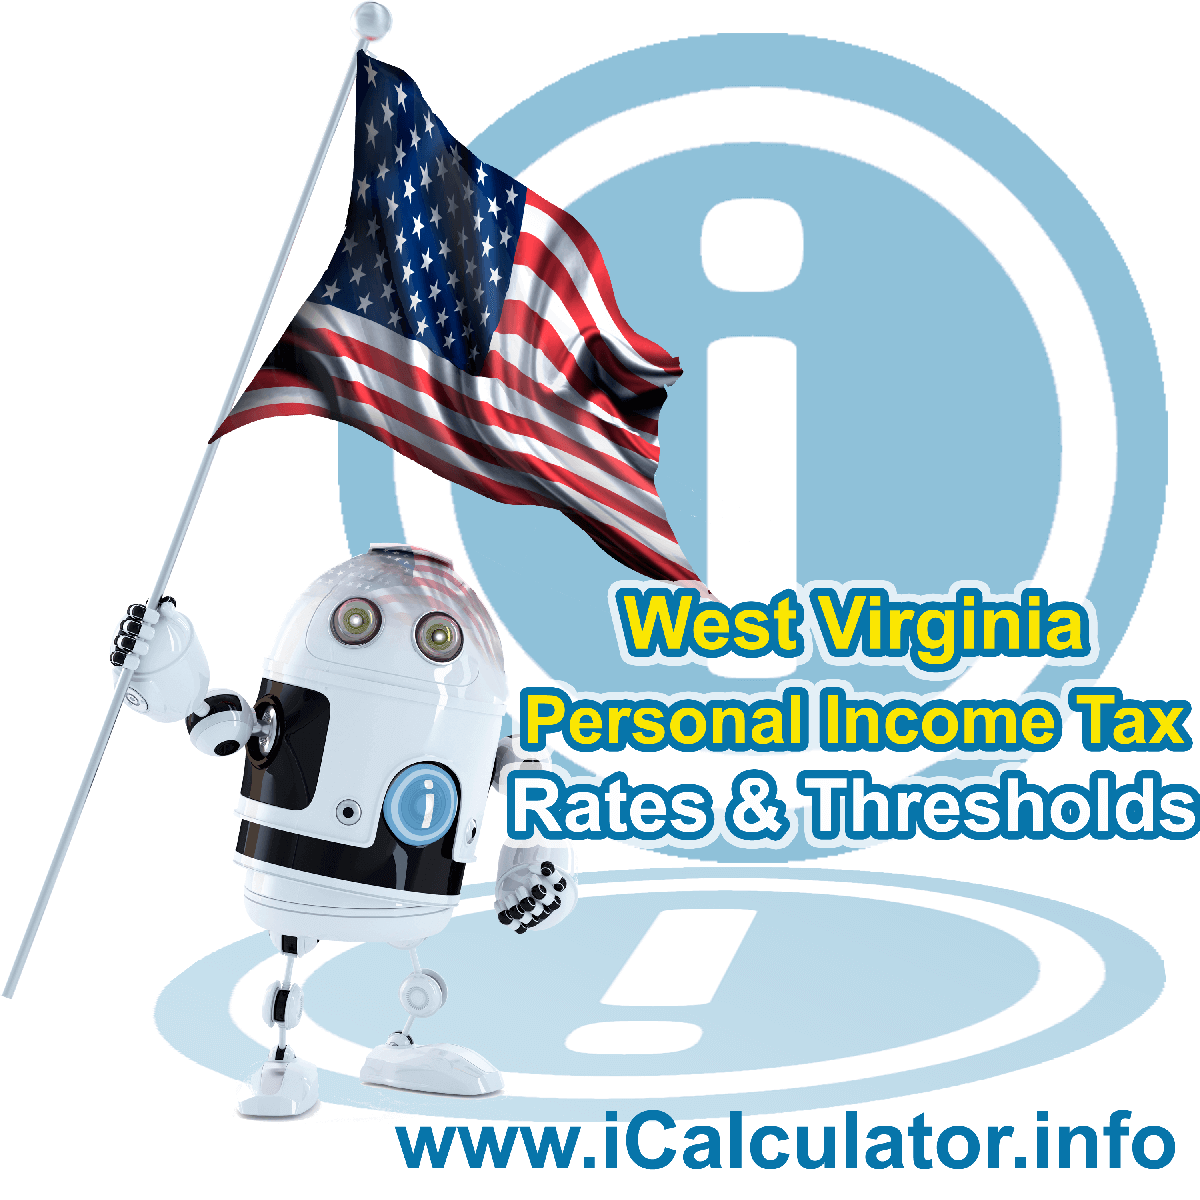 West Virginia State Tax Tables 2021. This image displays details of the West Virginia State Tax Tables for the 2021 tax return year which is provided in support of the 2021 US Tax Calculator